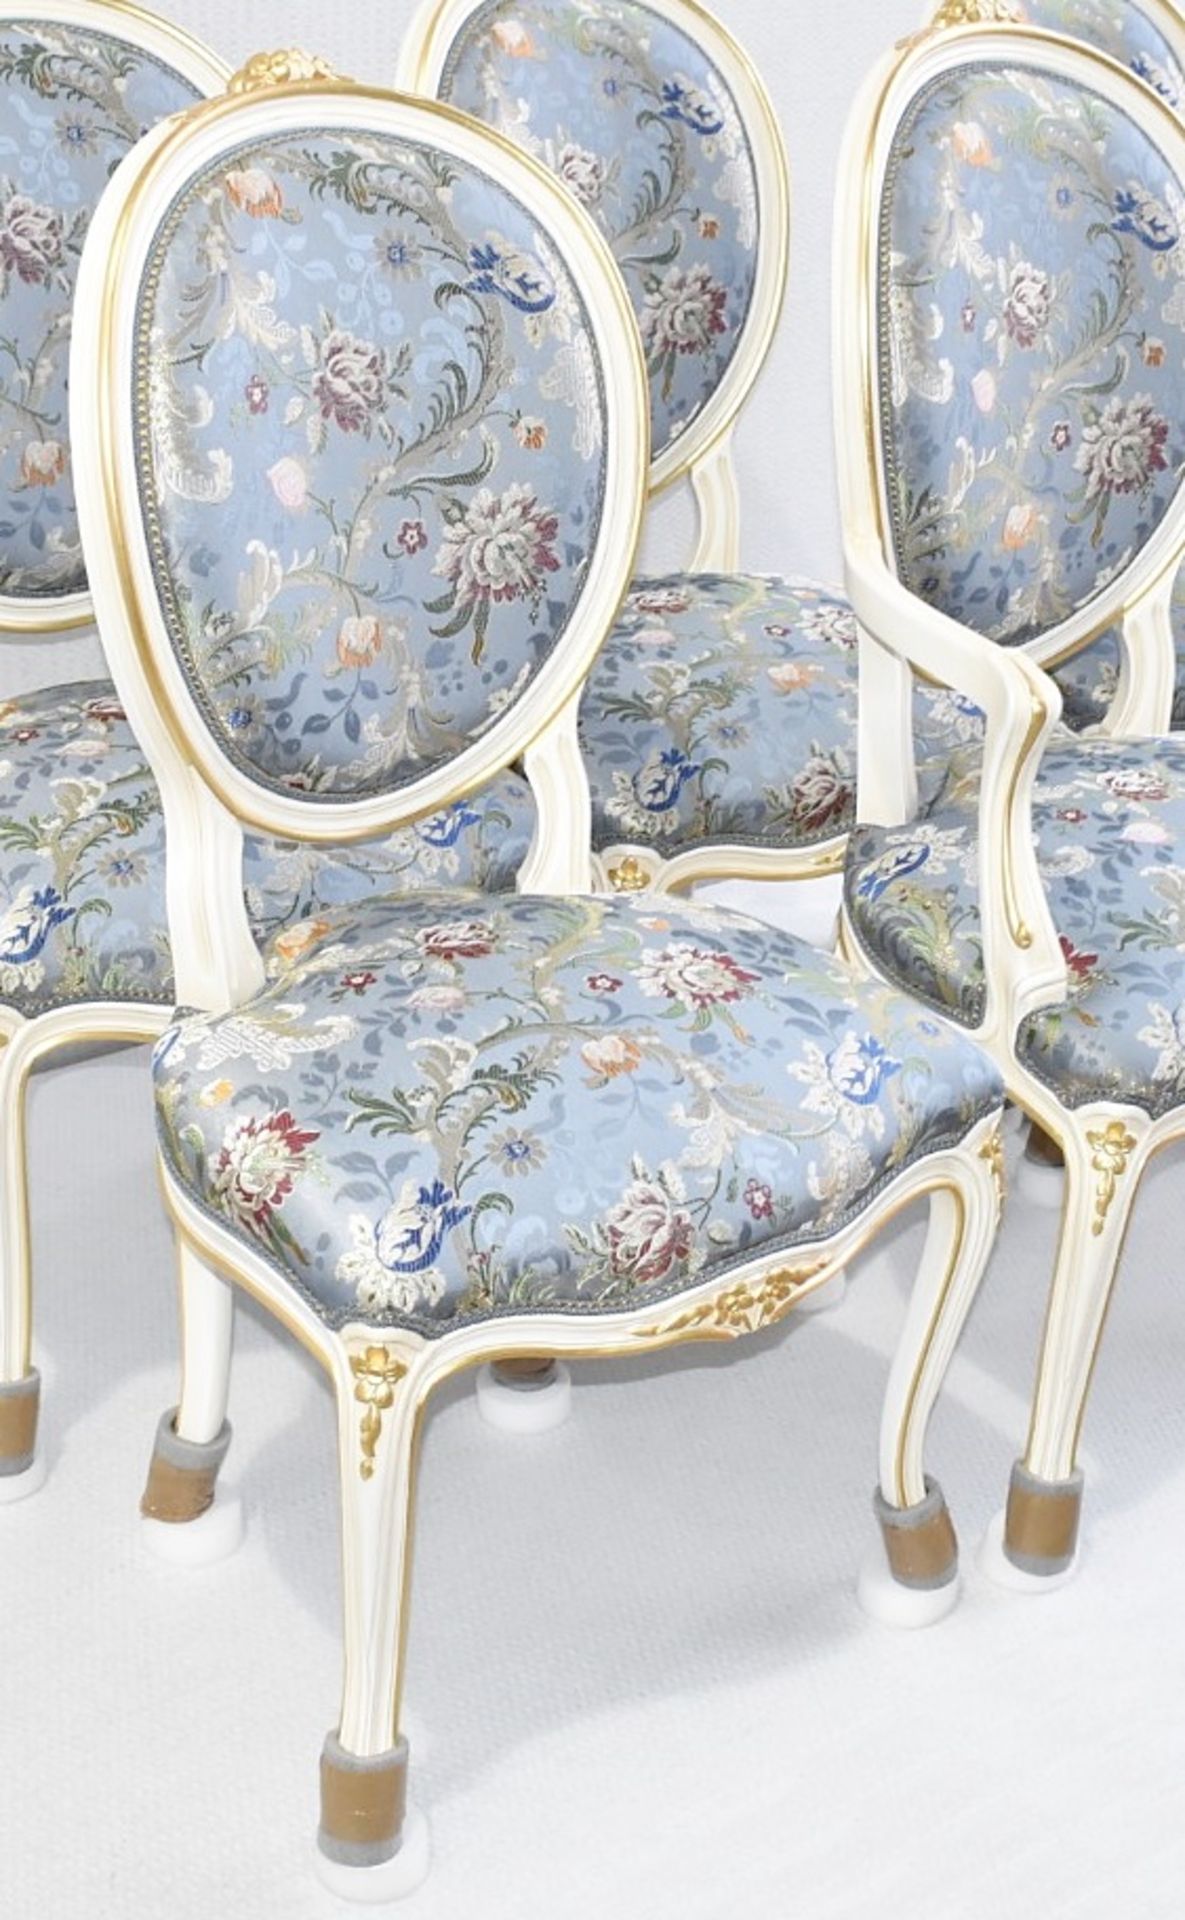 Set of 6 x ANGELO CAPPELLINI 'Timeless' Baroque-style Carved Dining Chairs, Floral Upholstered - Image 6 of 14